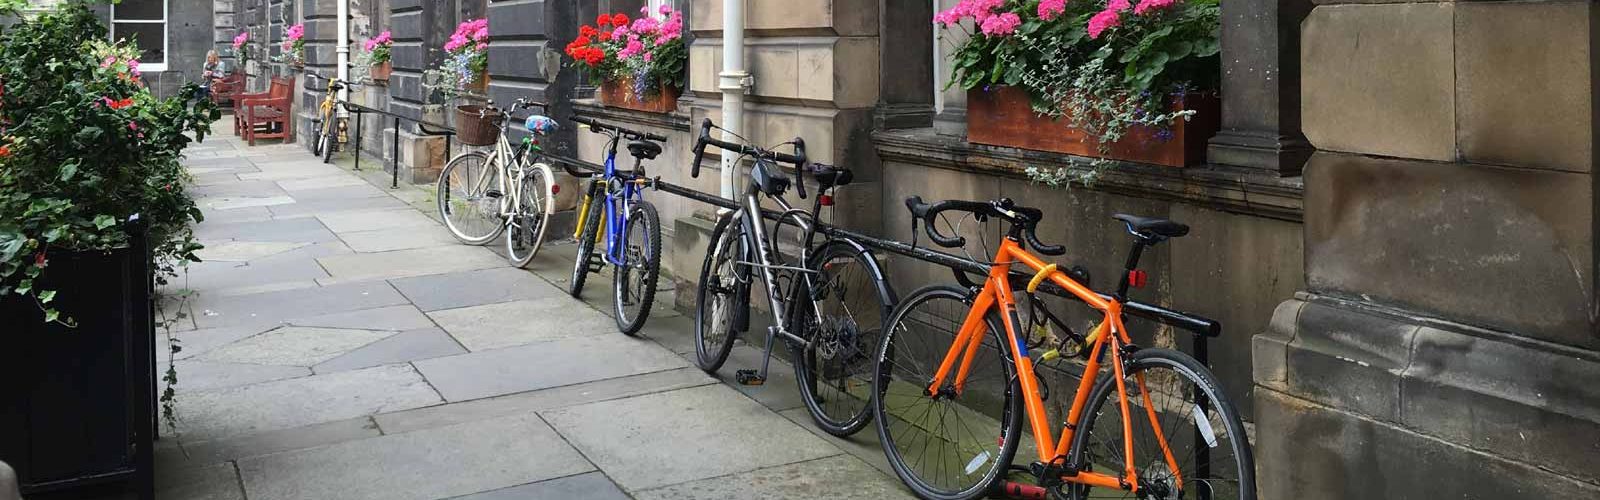 Biked lined up outside a building in Edinburgh